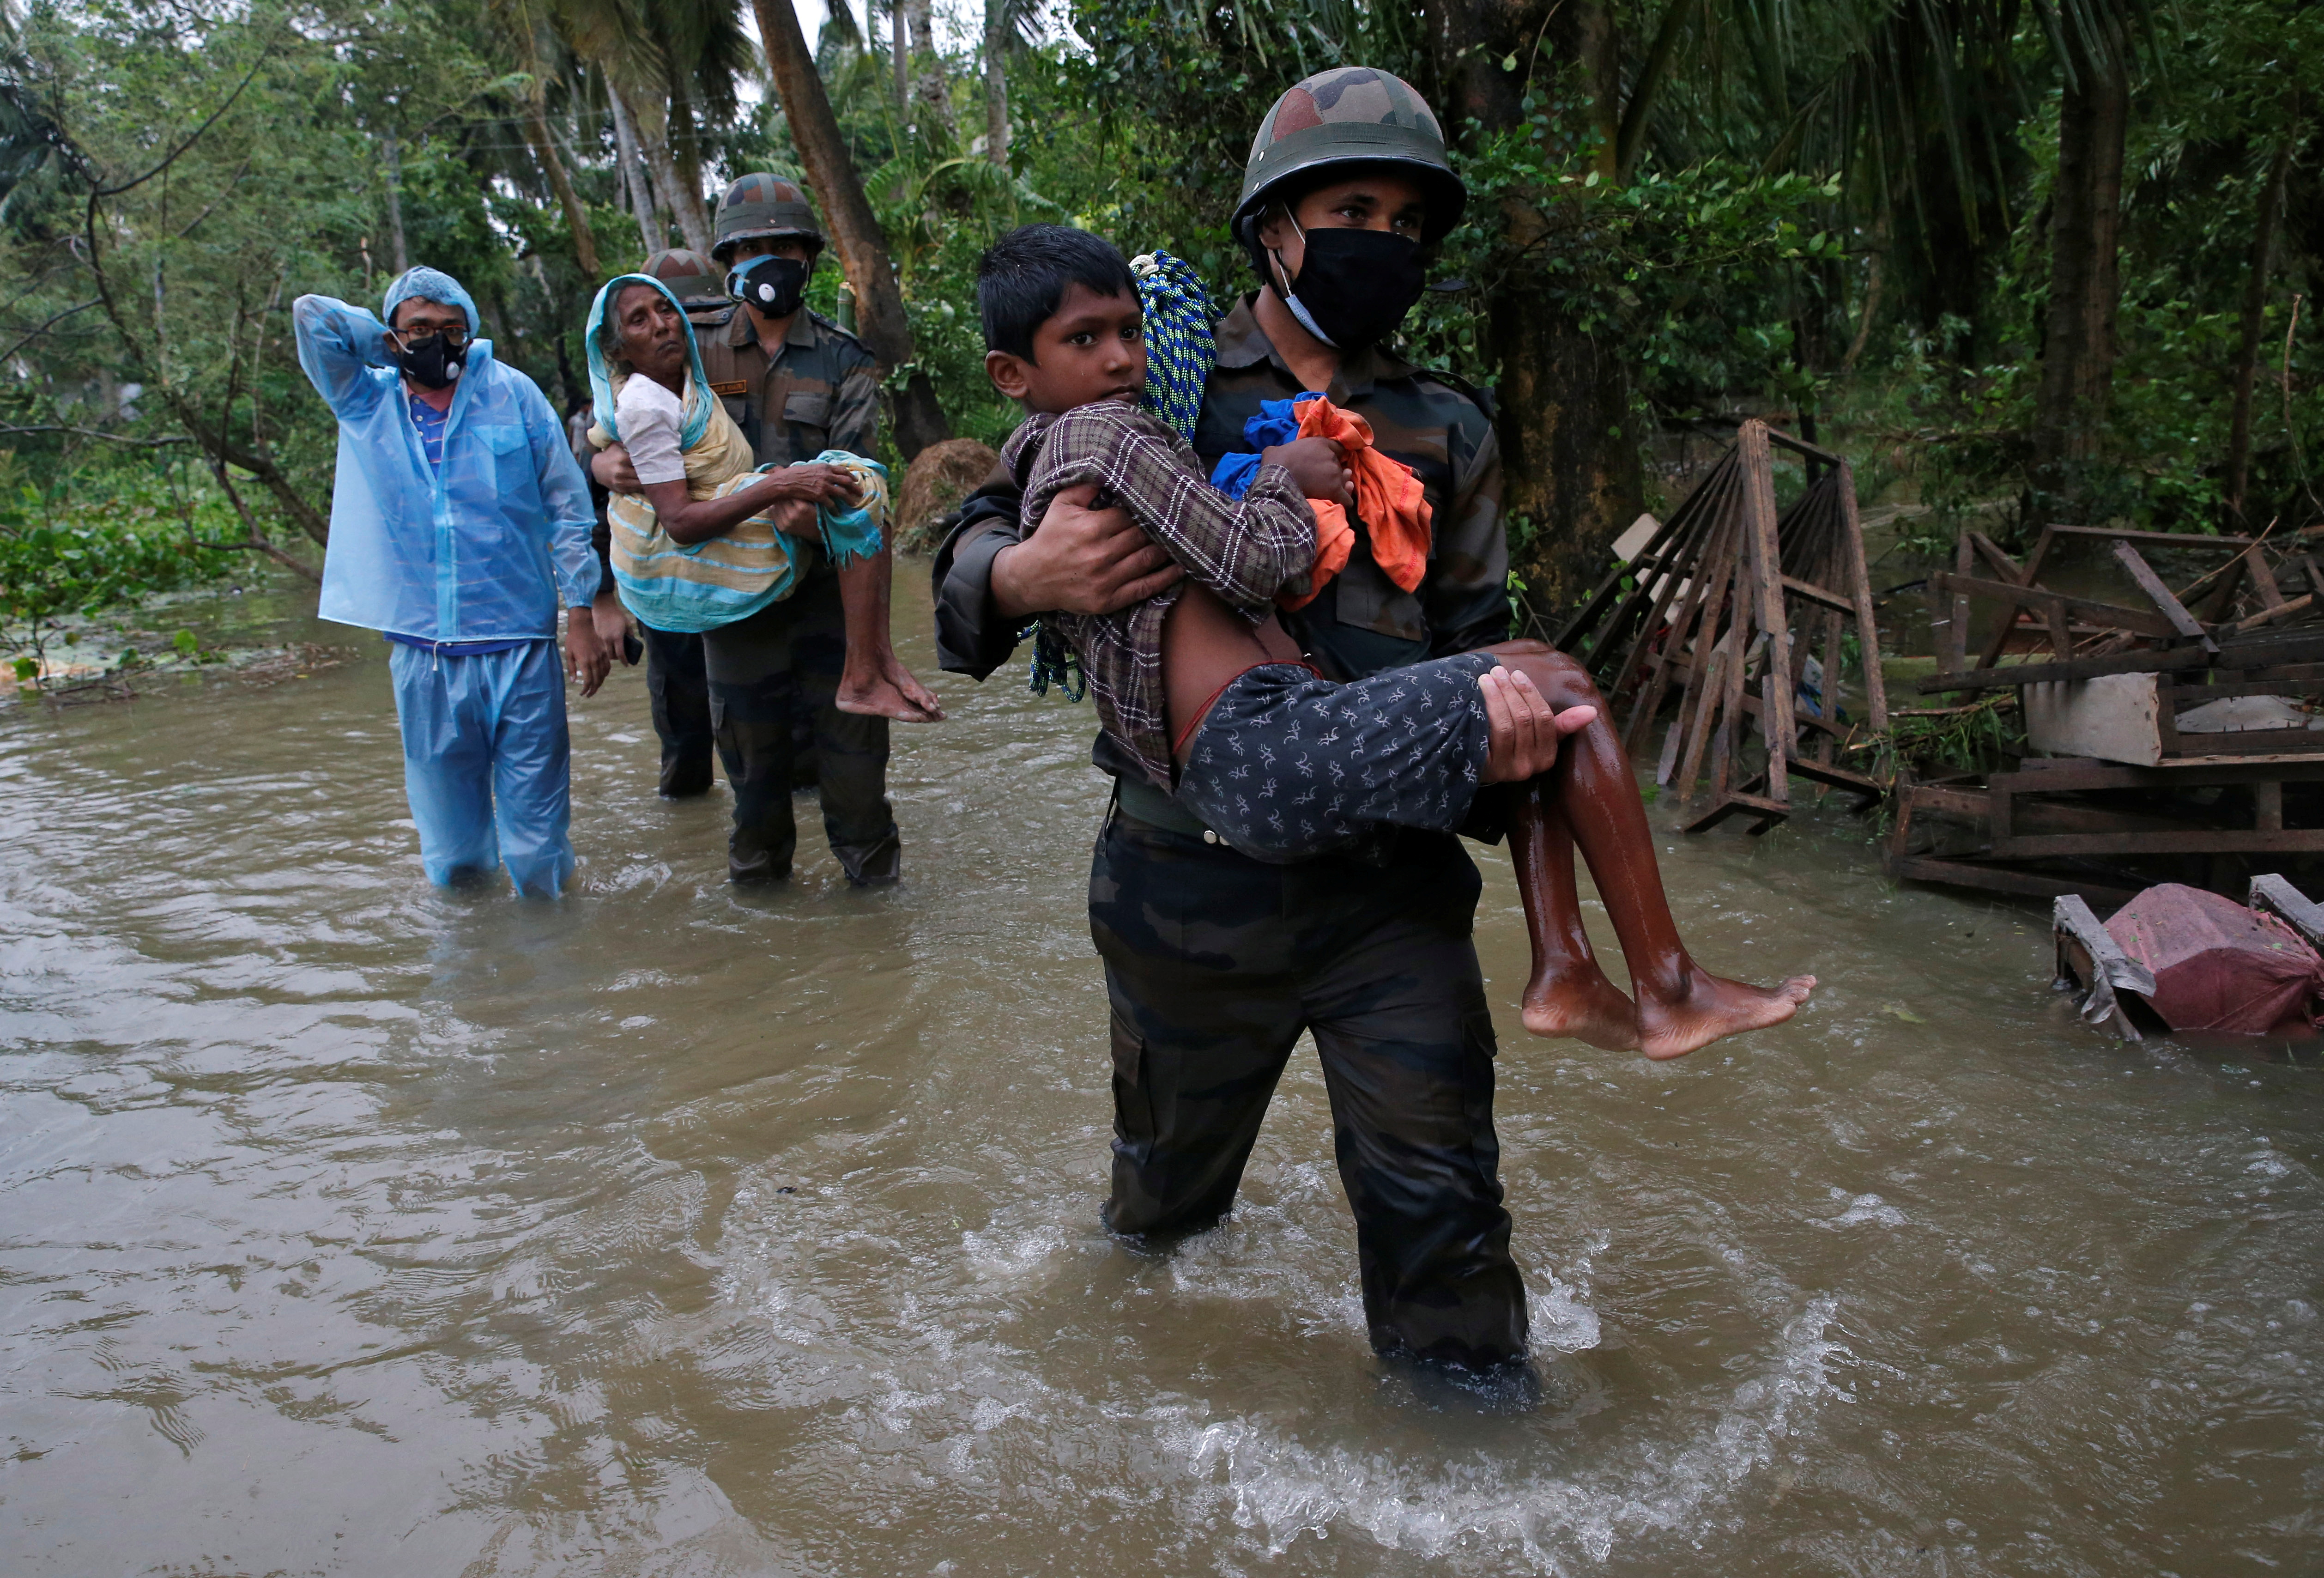 Army soldiers evacuate people from a flooded area to safer places as Cyclone Yaas makes landfall at Ramnagar